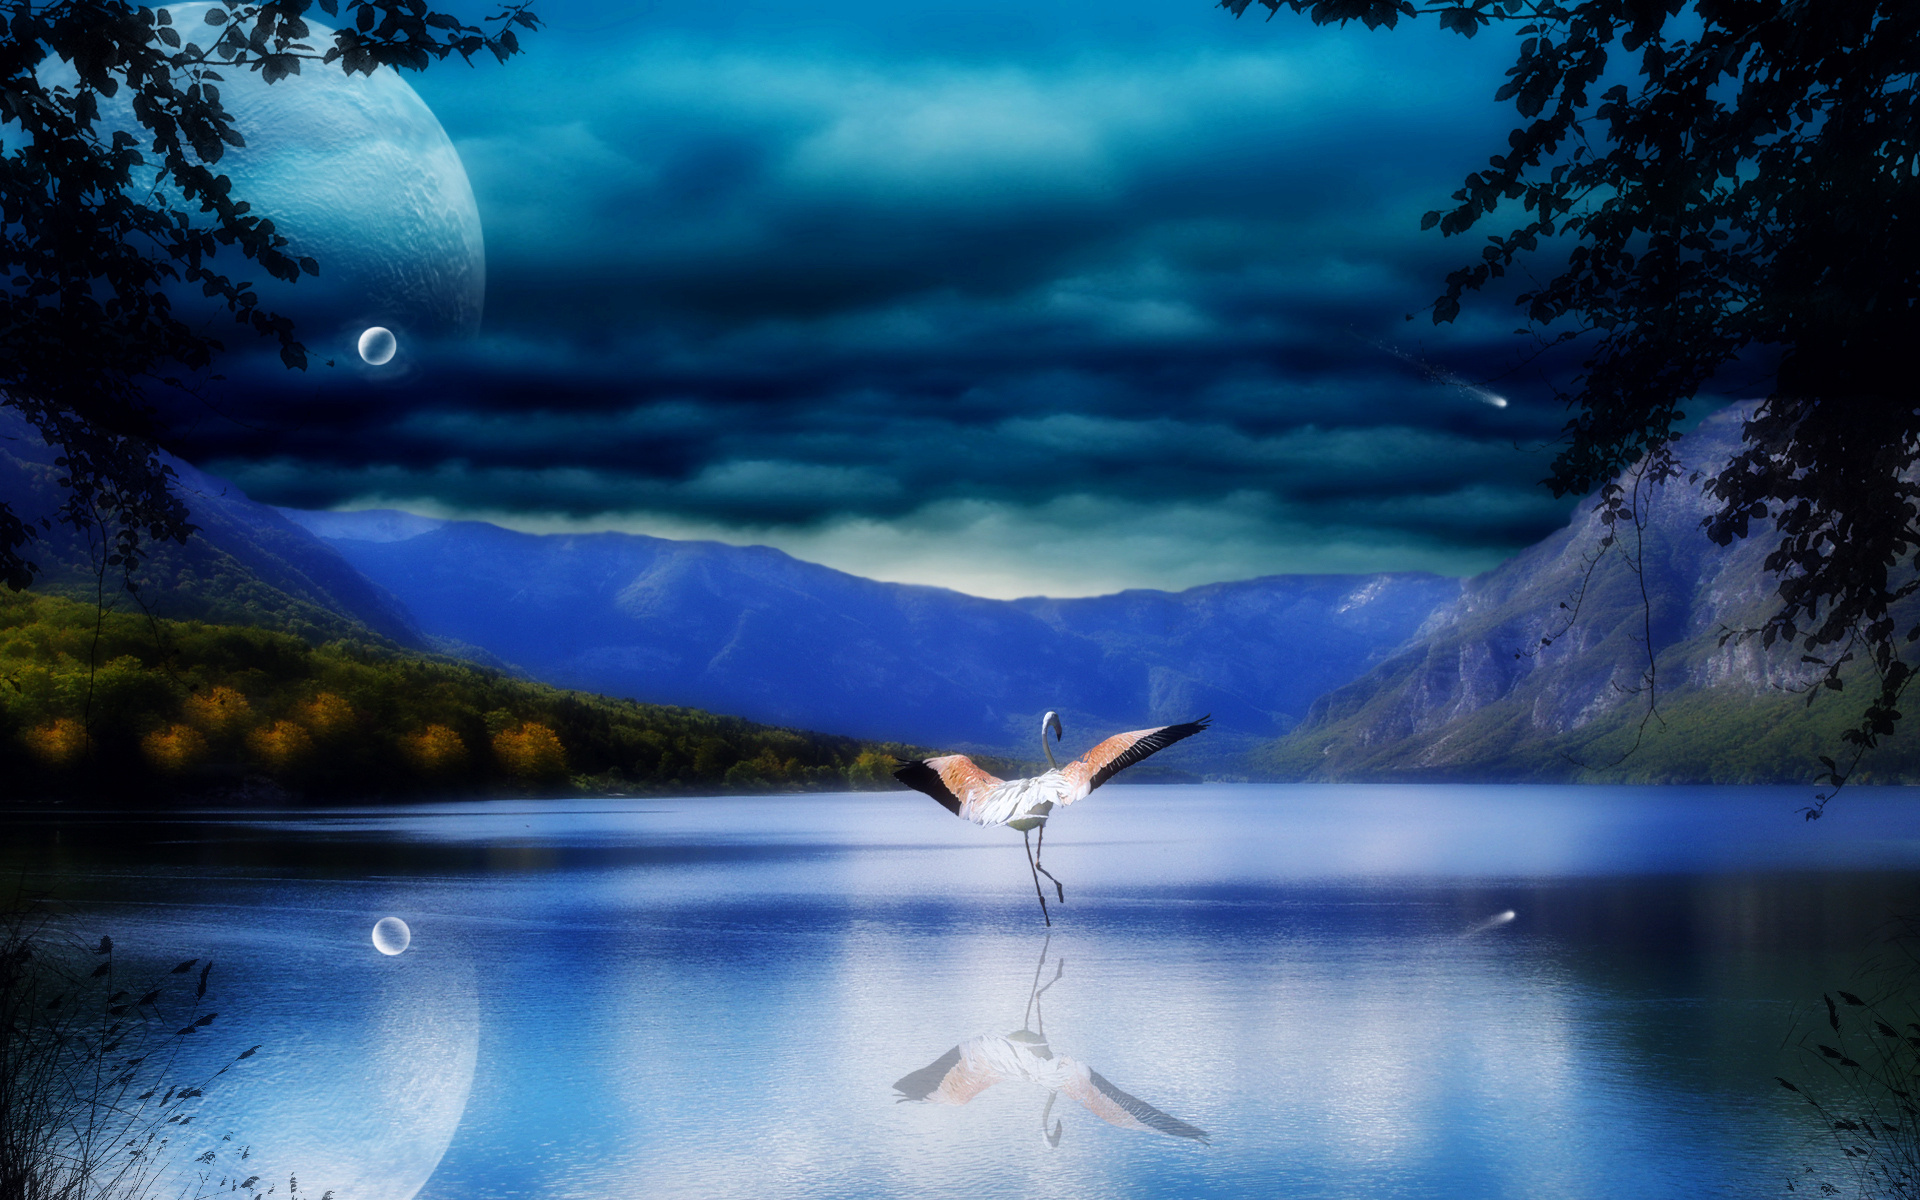 cg, Digital, Art, Manipulation, Bubbles, Dream, Mood, Birds, Flight, Flamingo, Nature, Lakes, Mountains, Reflection, Sky, Clouds, Autumn, Fall, Trees, Leaves, Forest, Shore Wallpaper